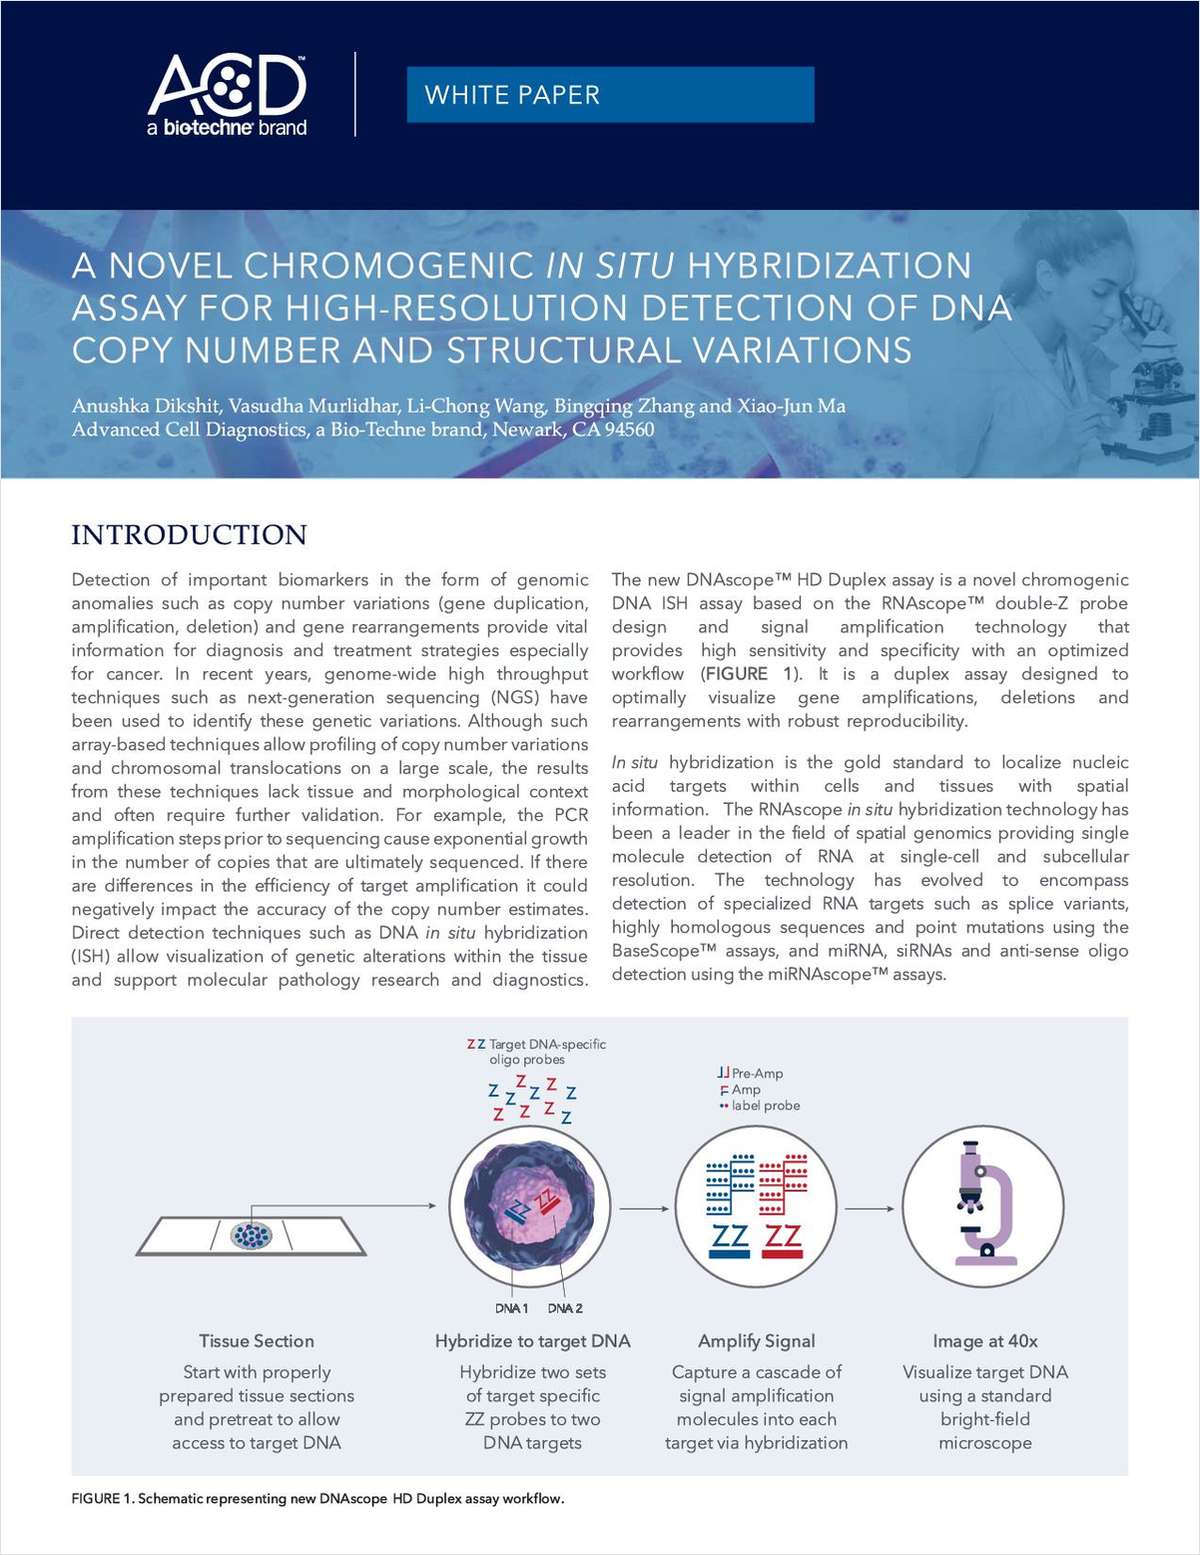 A Novel Chromogenic In Situ Hybridization Technology for High-Resolution Detection of DNA Copy Number and Structural Variations